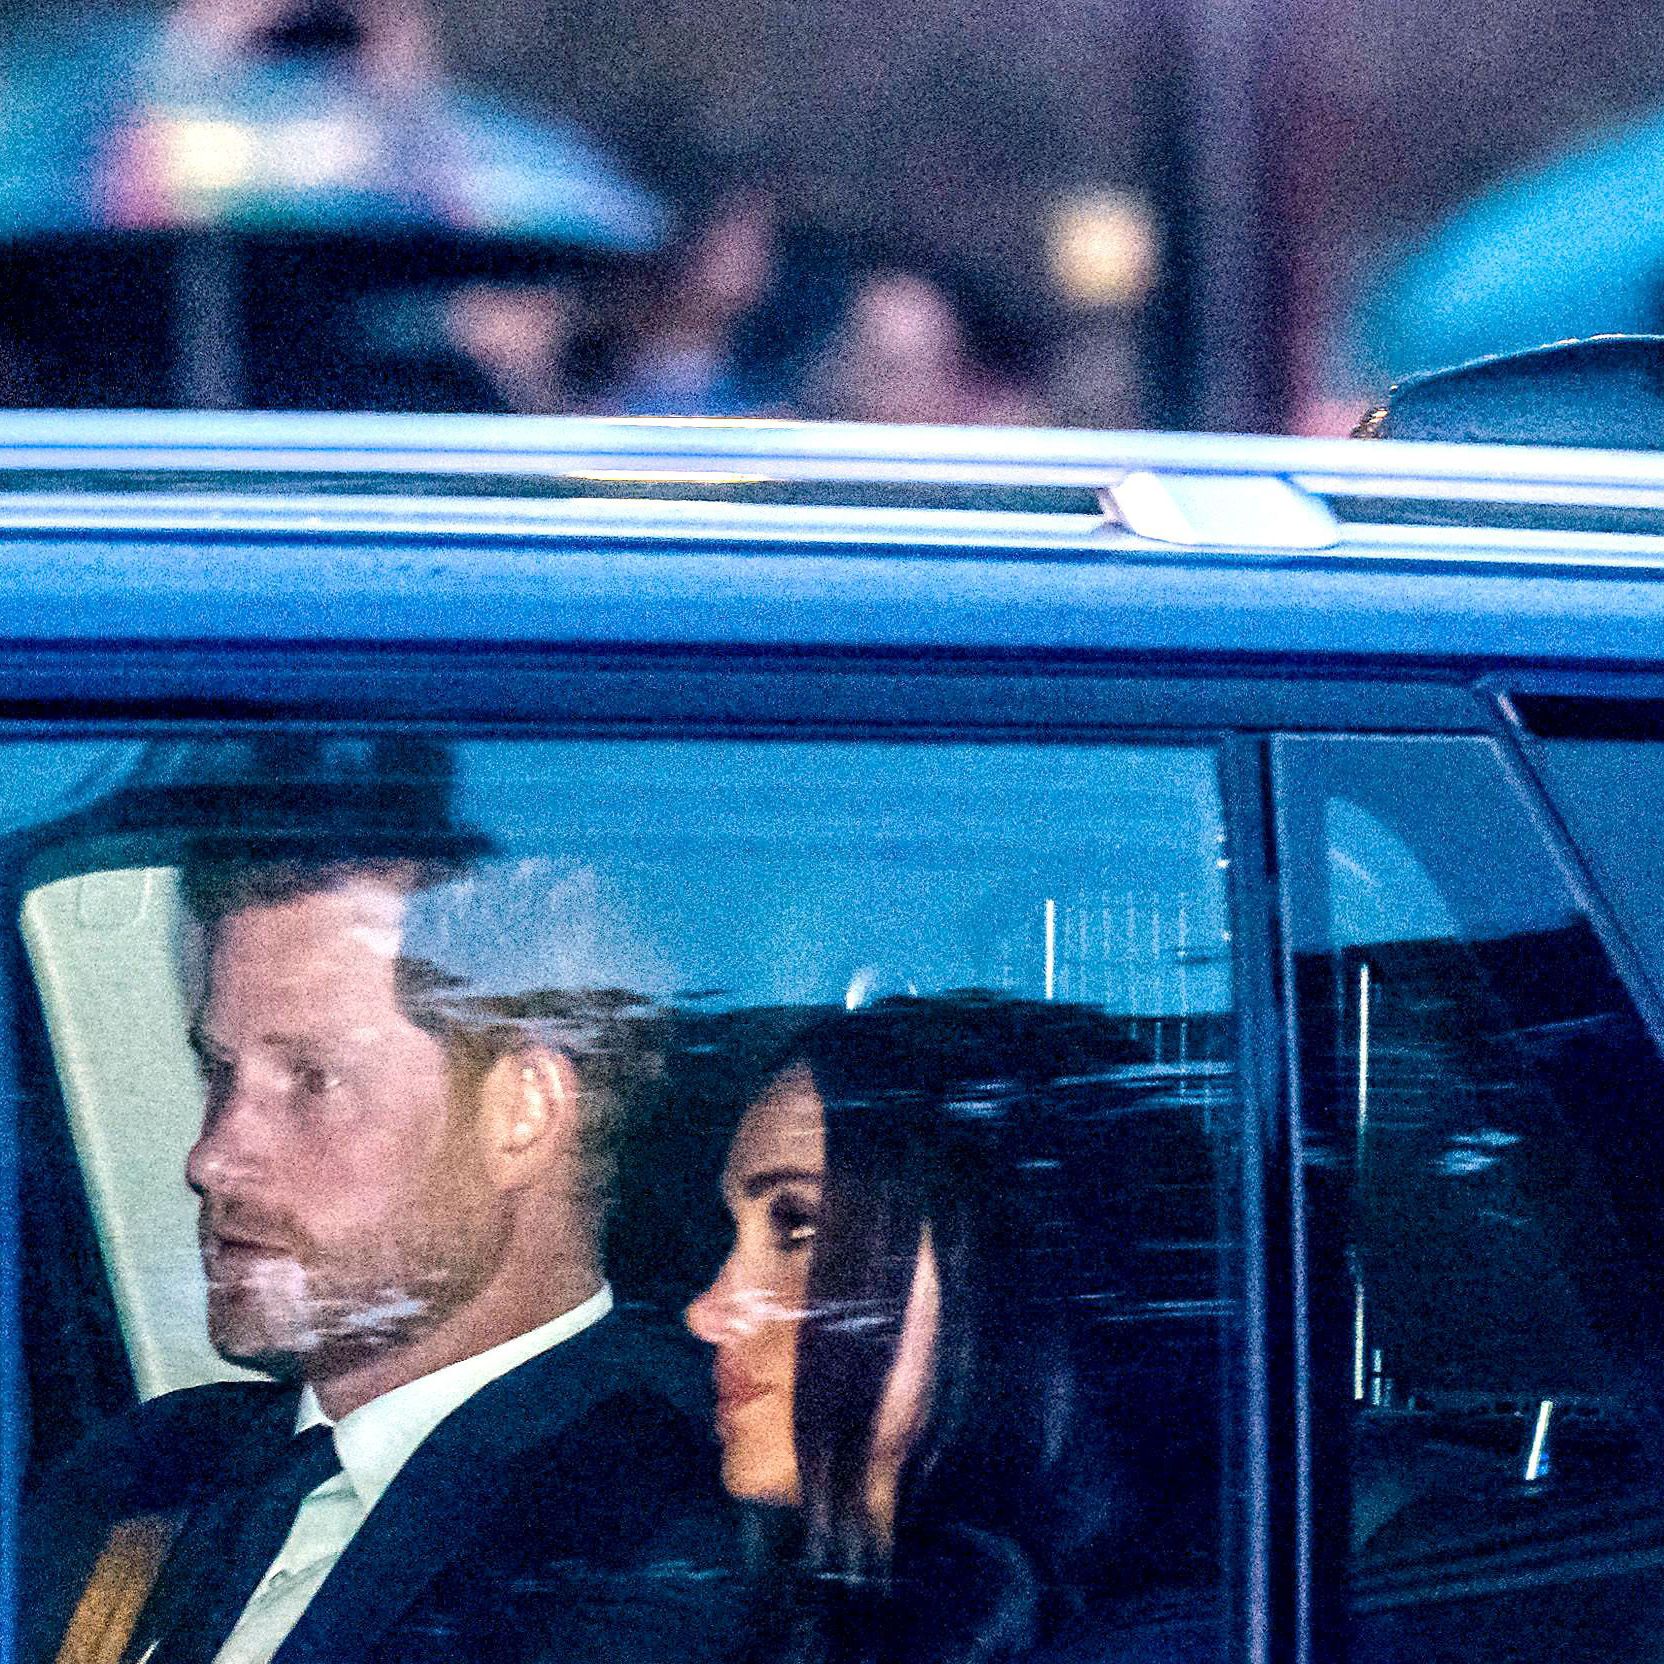 The Duchess of Sussex is giving herself time to grieve privately.